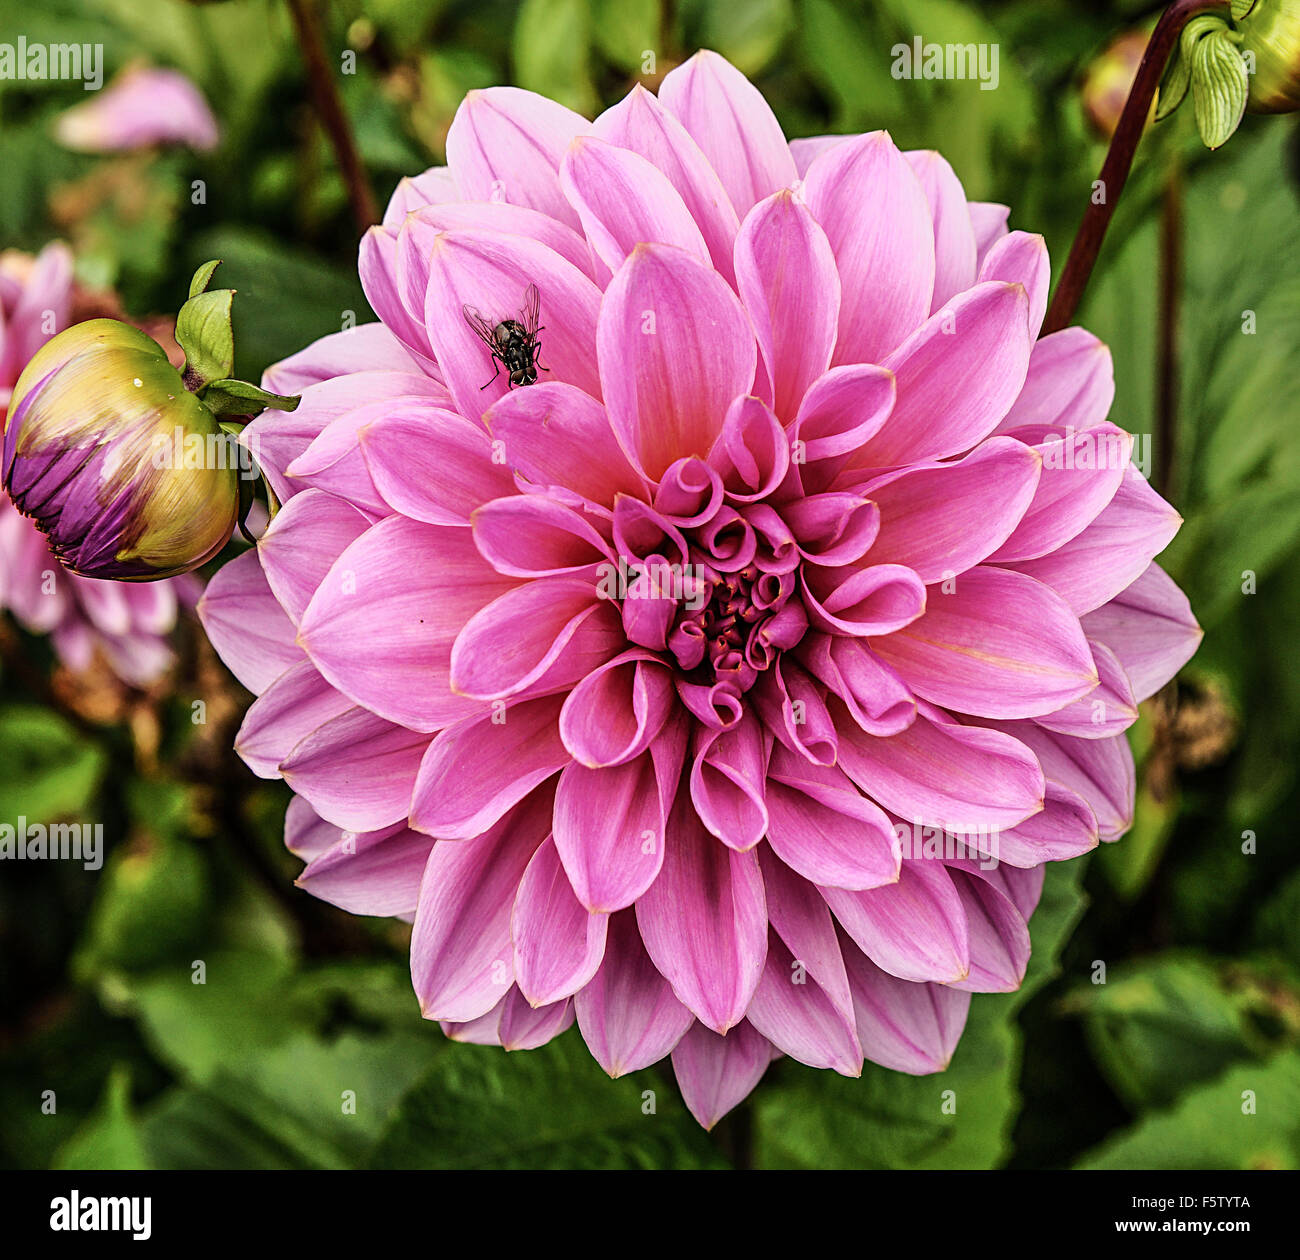 pink dahlia in natural setting Stock Photo